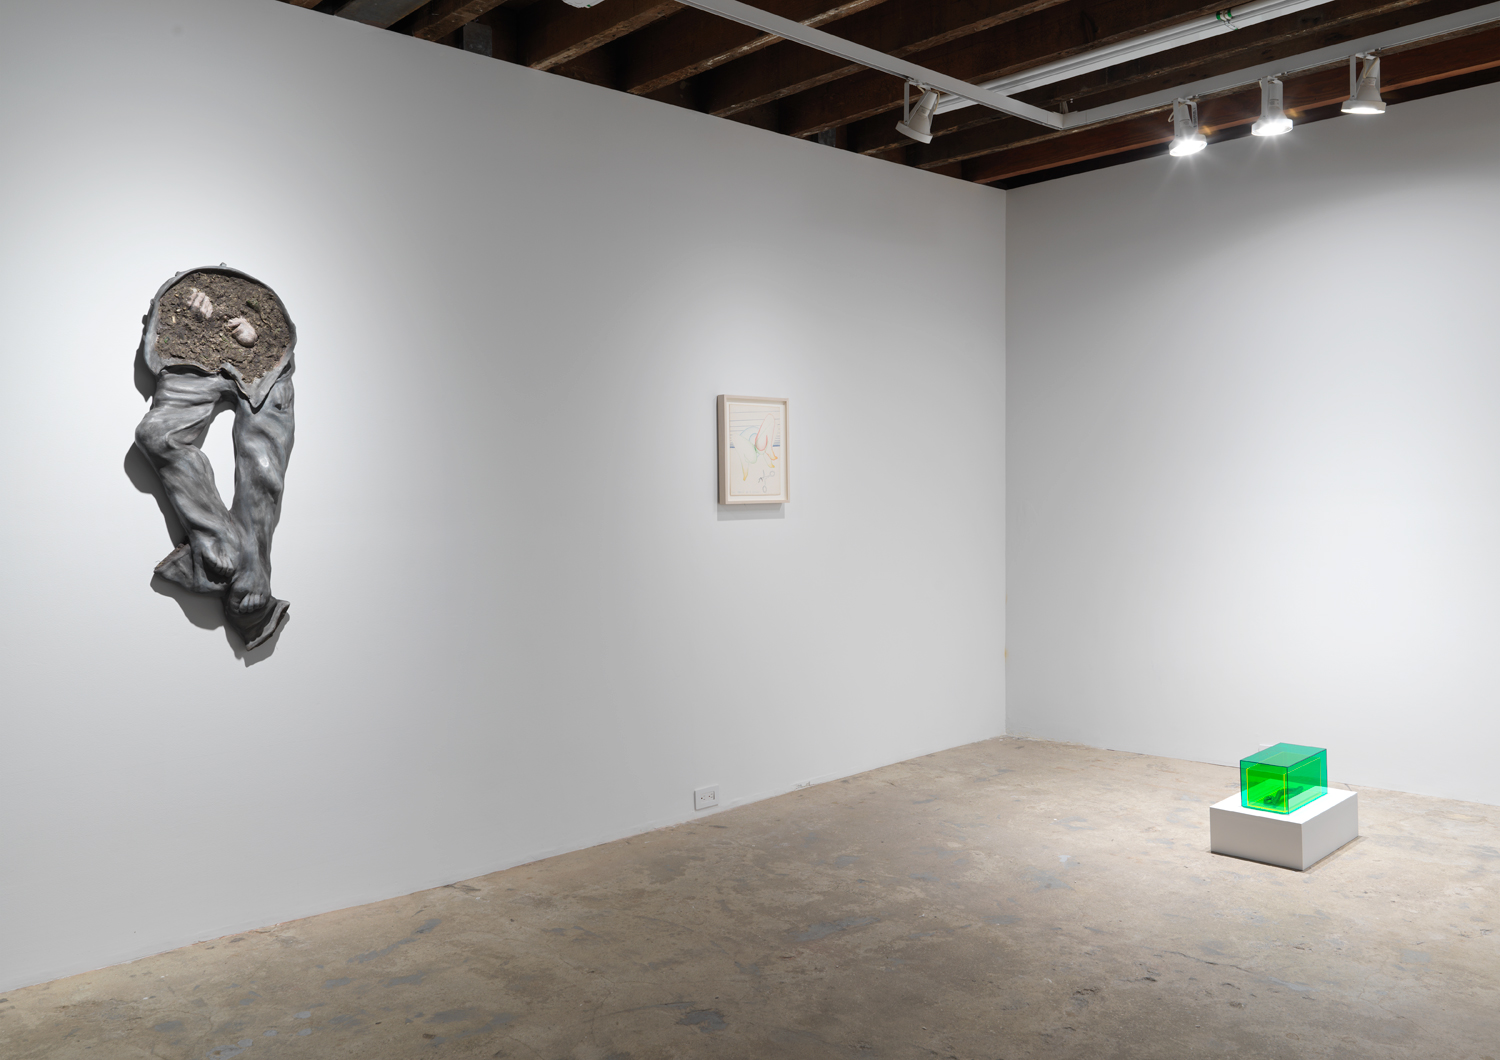 Installation view, A Detached Hand, organized by Nicole Will, Magenta Plains, New York, NY, 2019